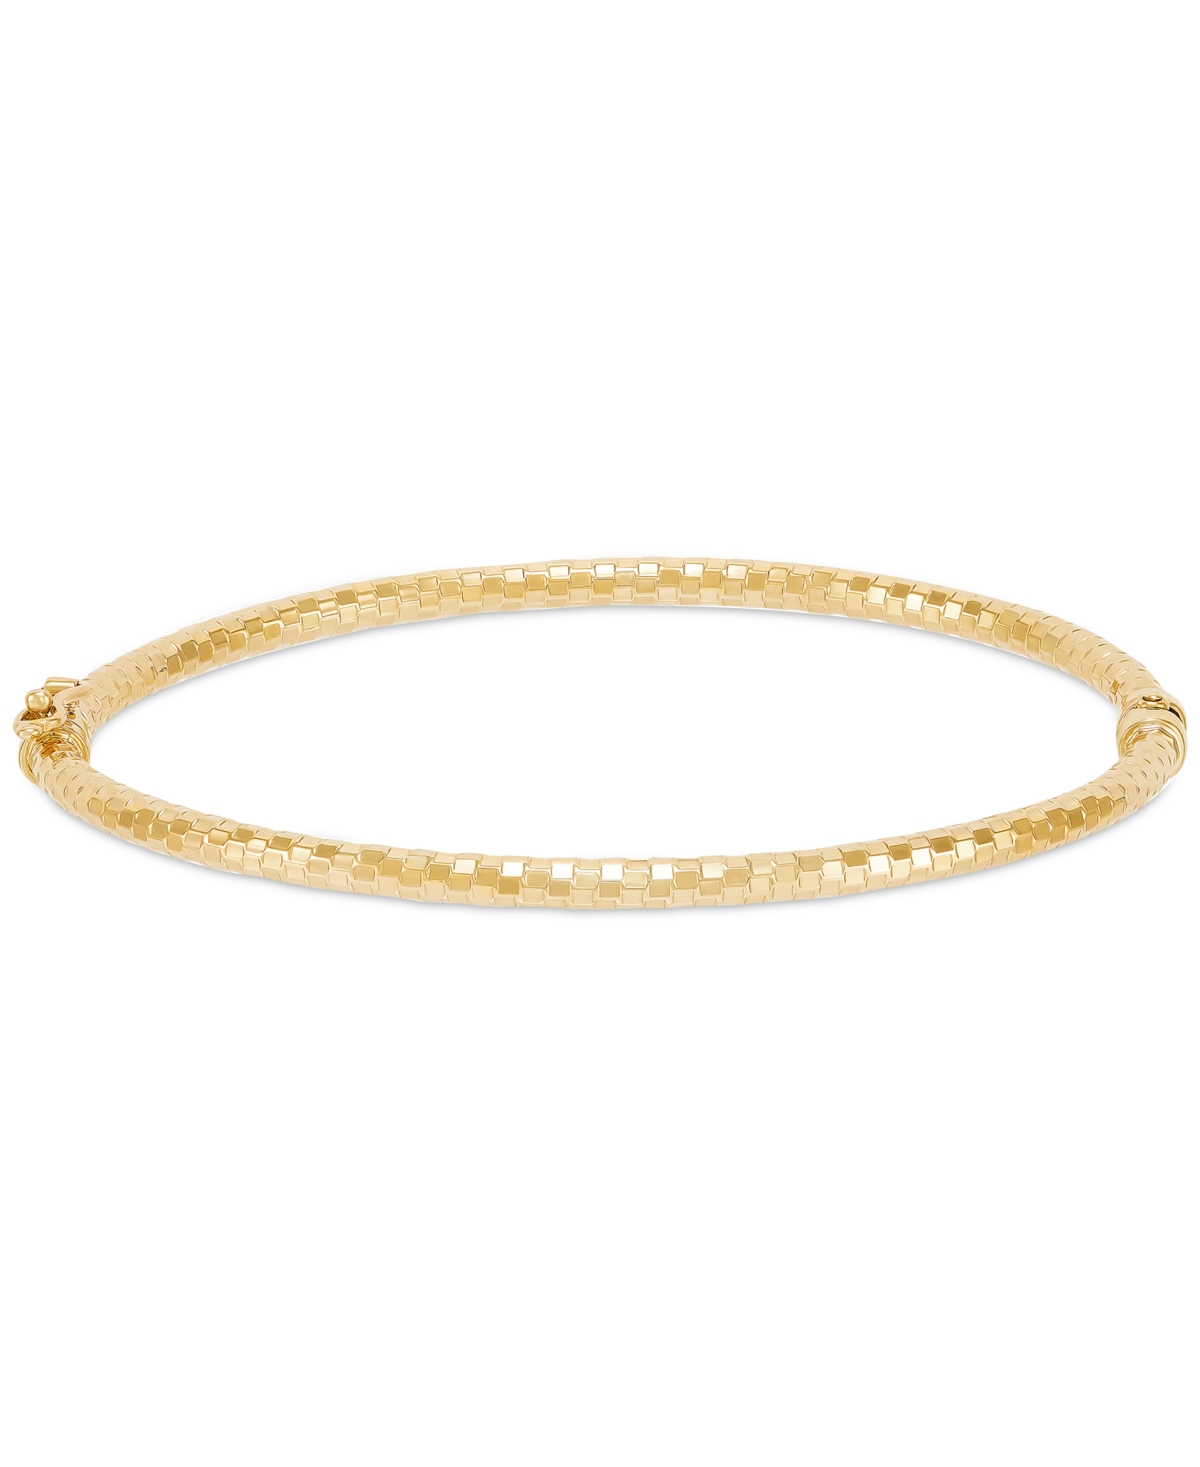 Textured Disco-Cut Hinged Bangle Bracelet in 10k Gold - Yellow Gold